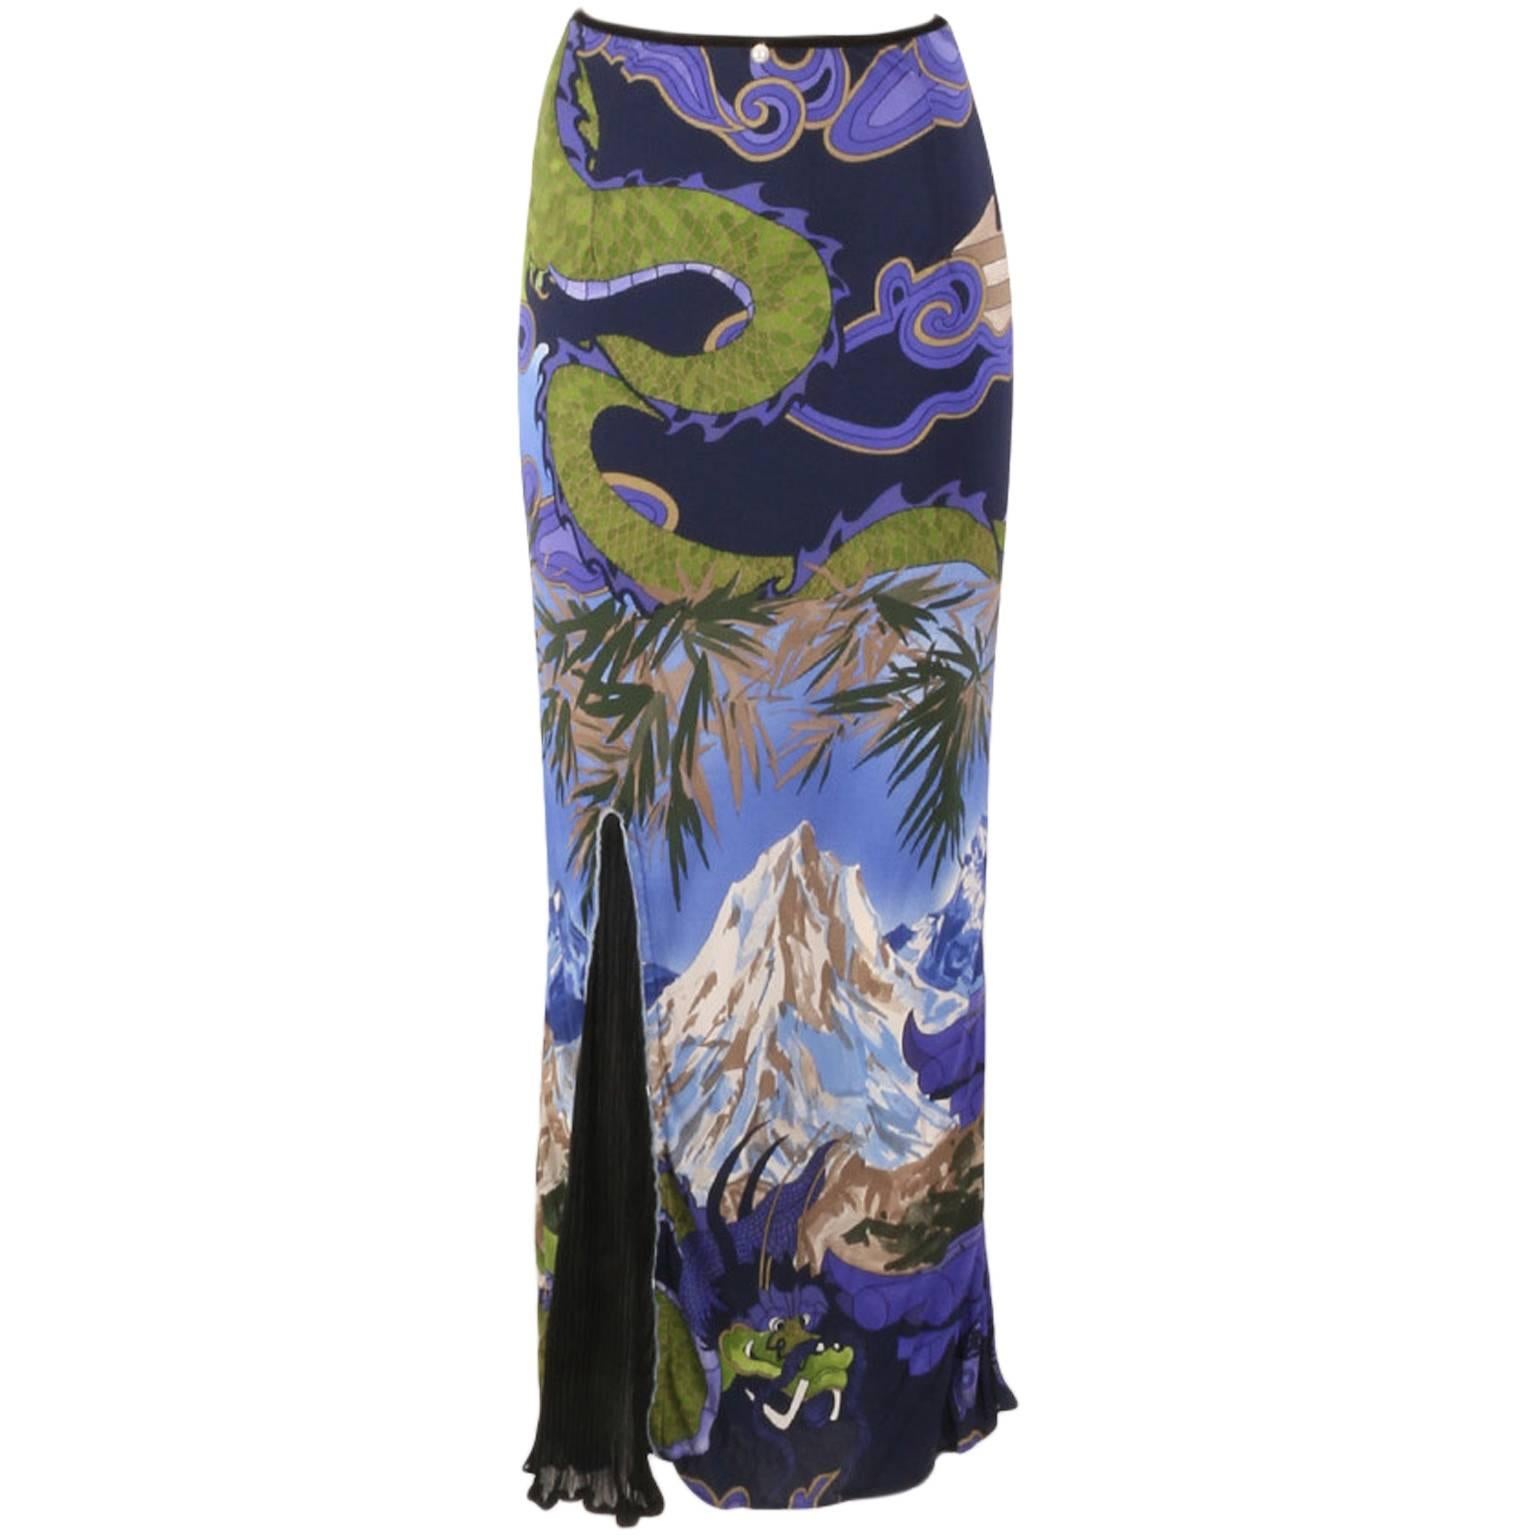 Original Voyage Oriental Style Maxi Skirt with Dragons and Bamboo Print Size 6/8 For Sale